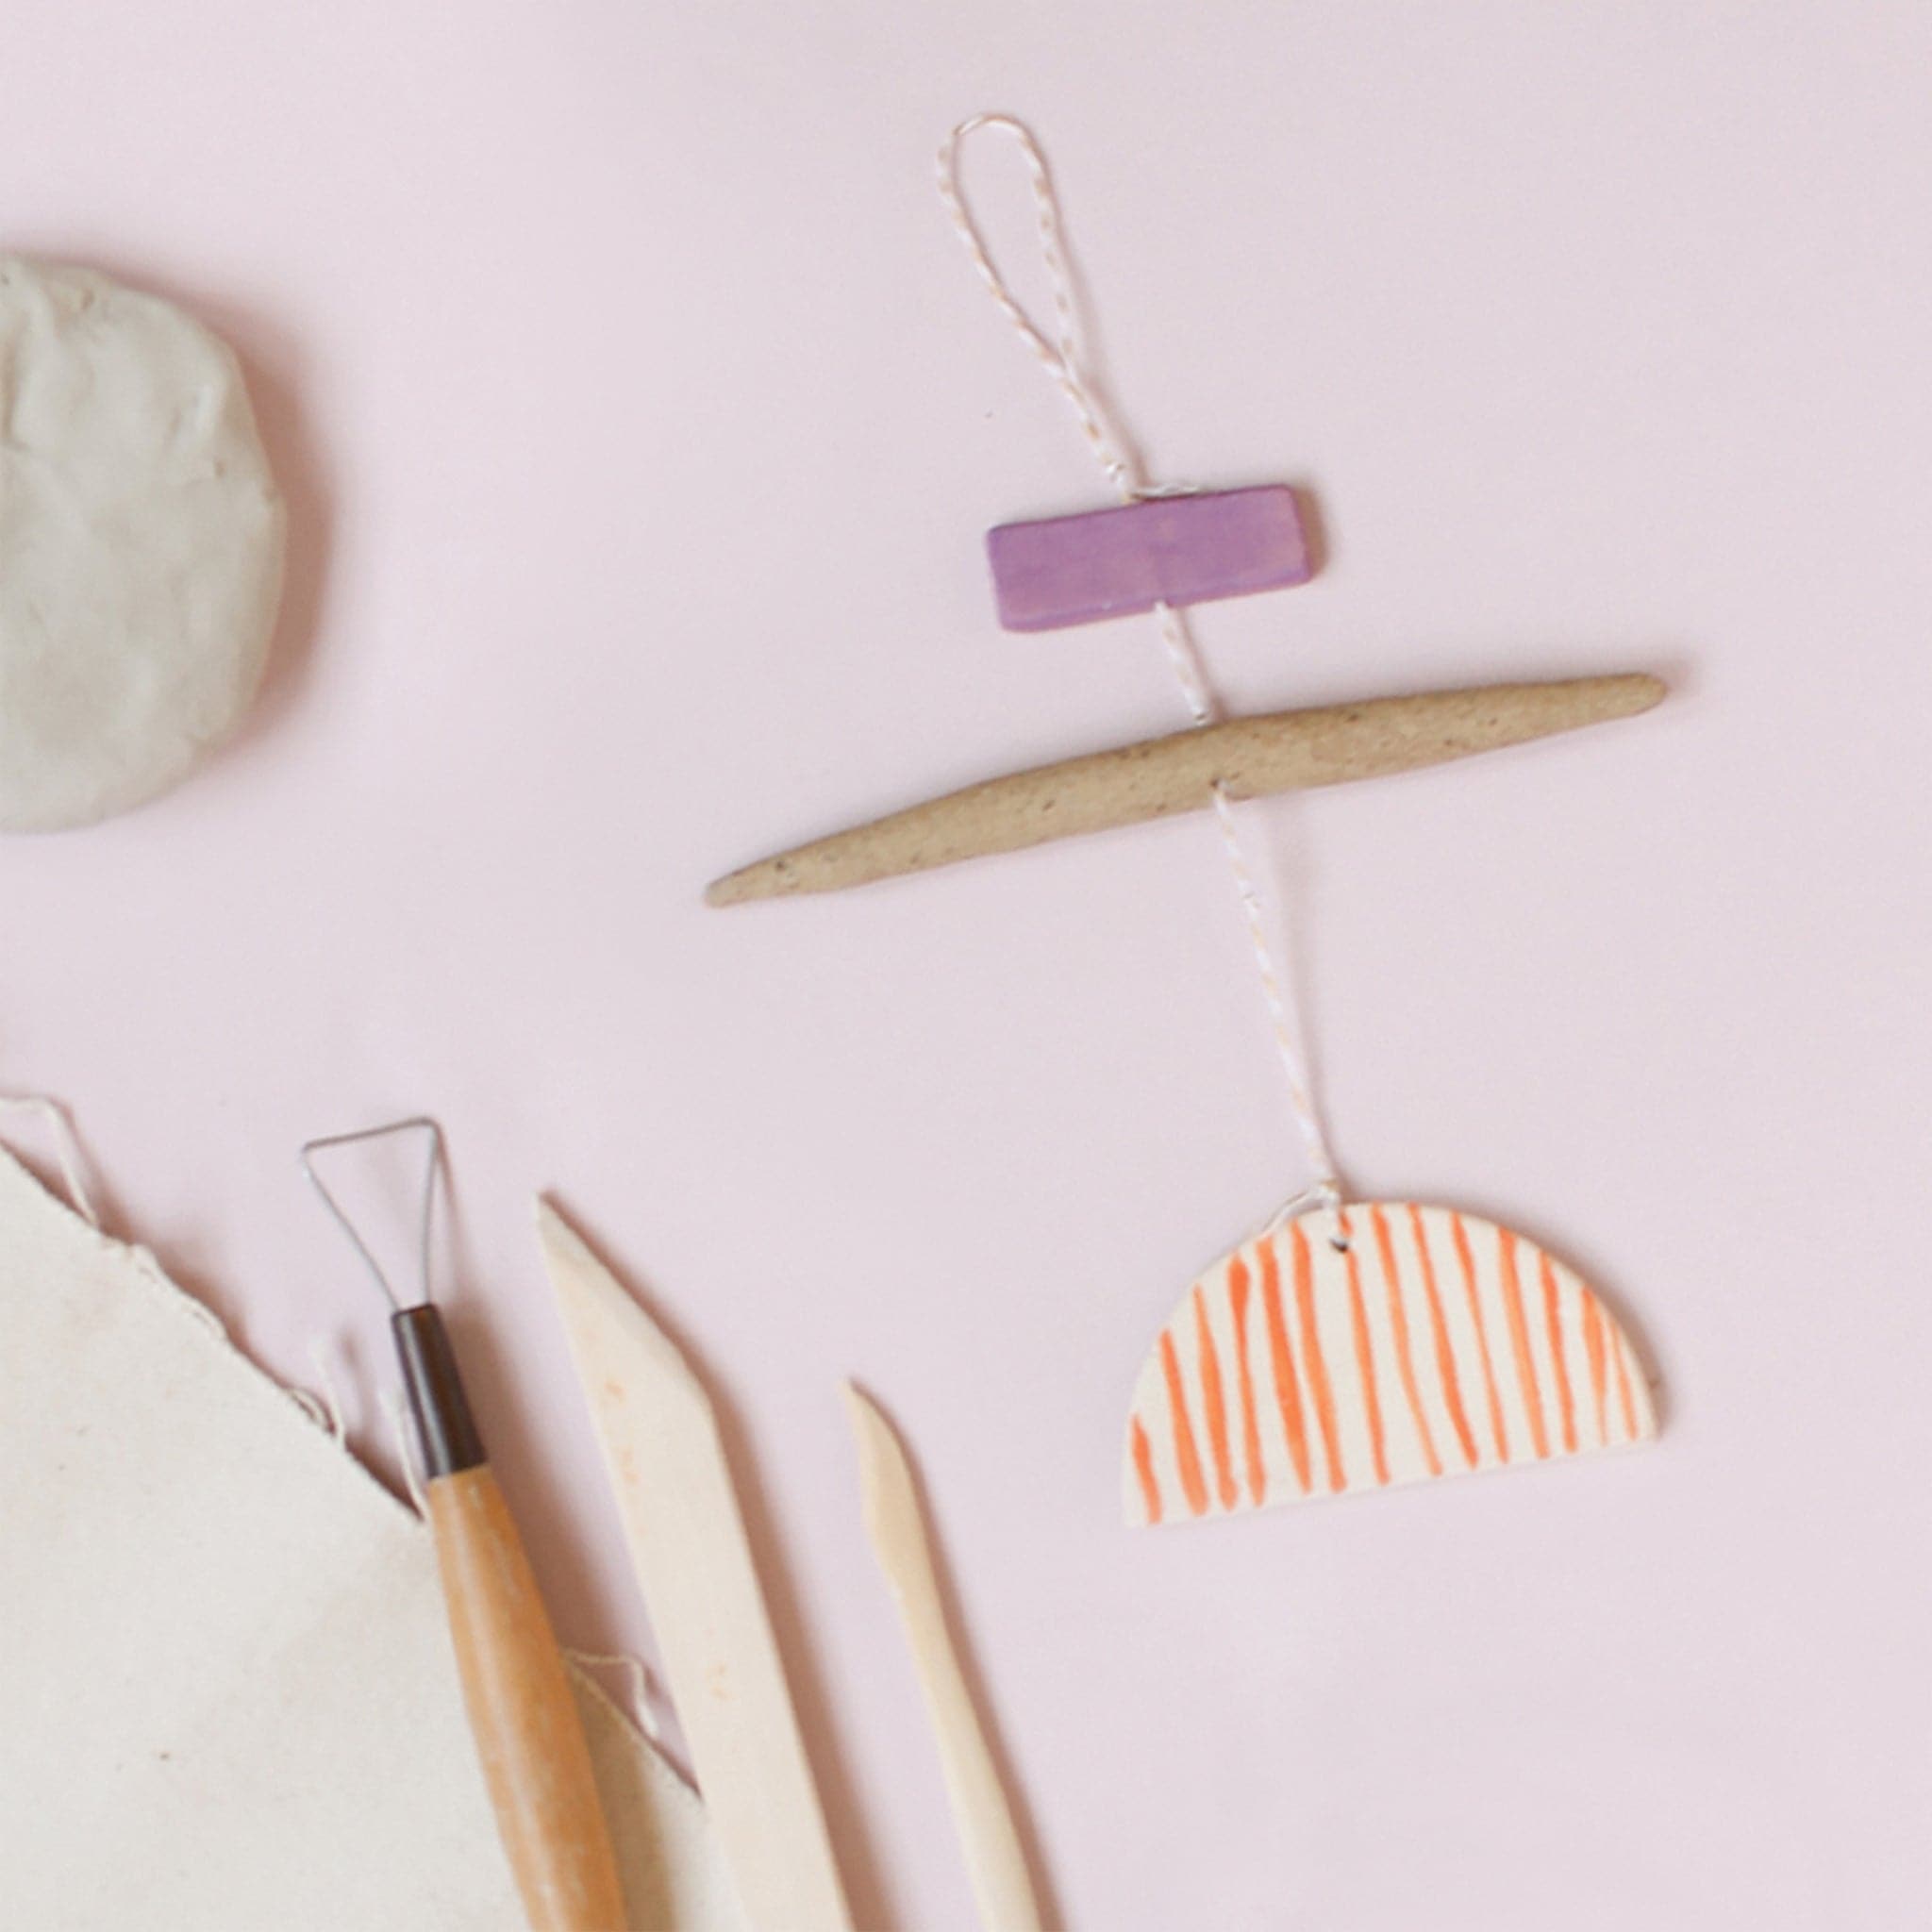 On a light pink background is two clay creations next to a rolling pin and modeling tools.